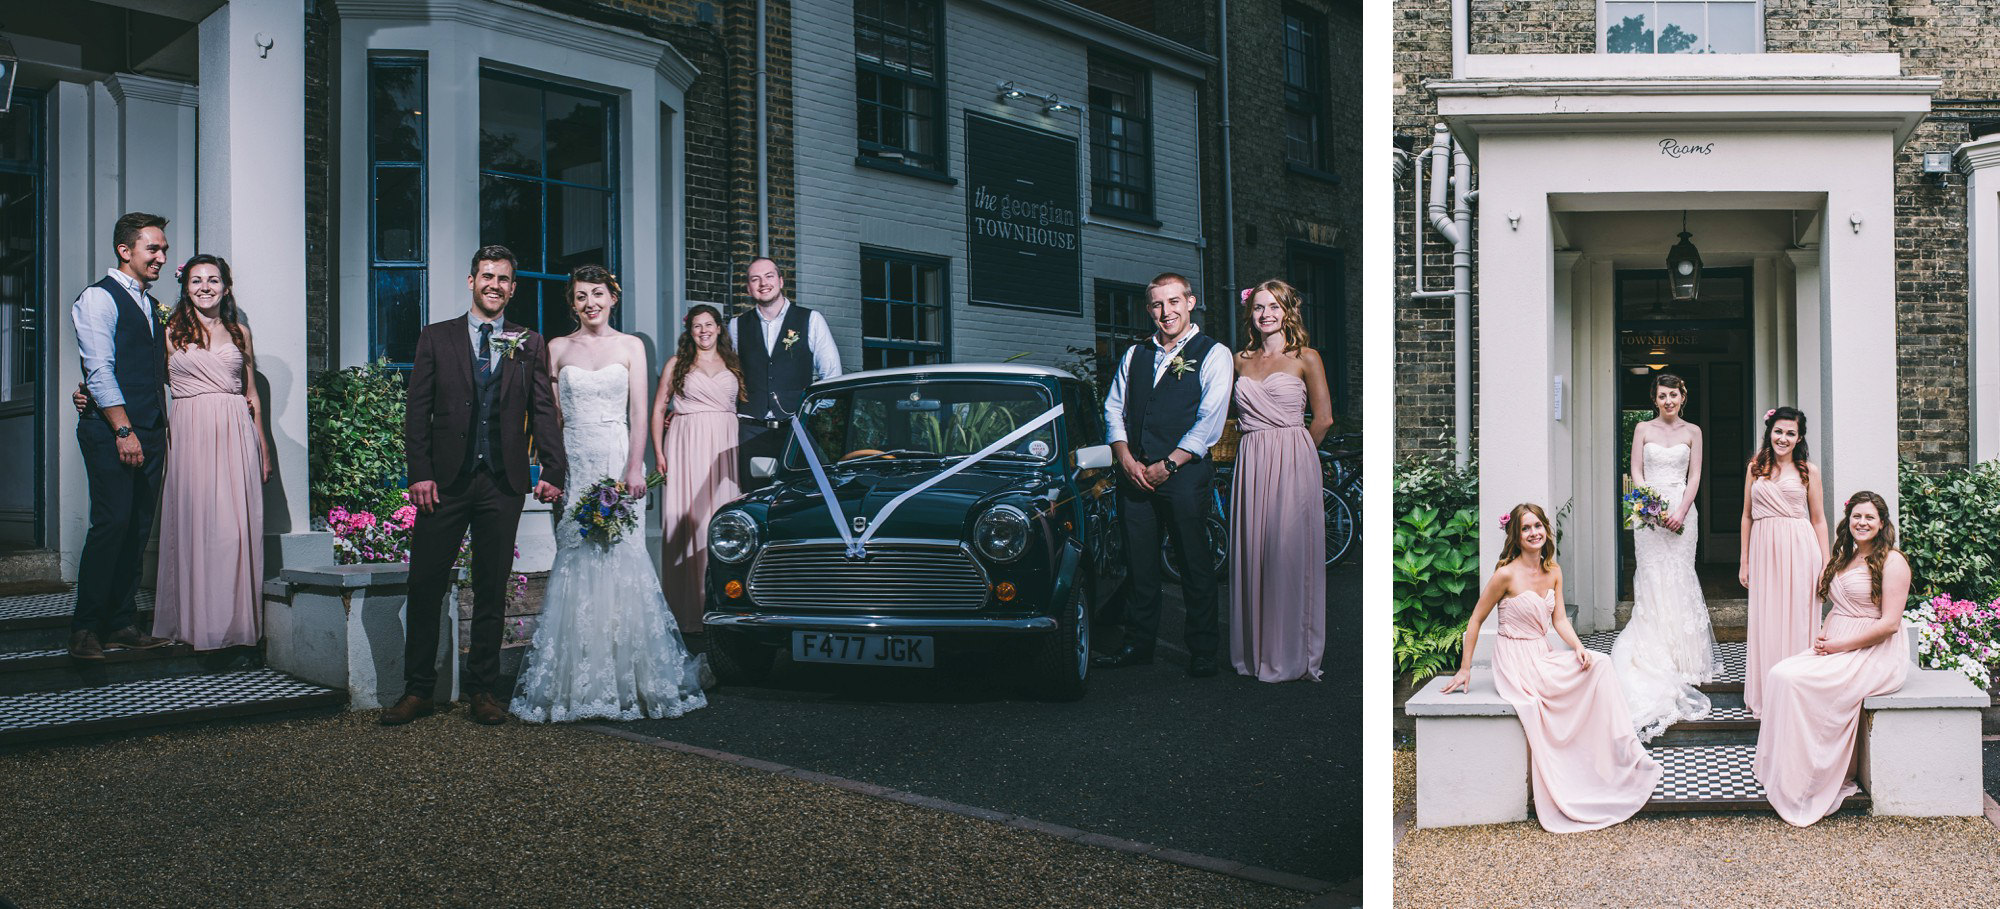 the-georgian-townhouse-norwich-wedding-by-james-powell-photography-034